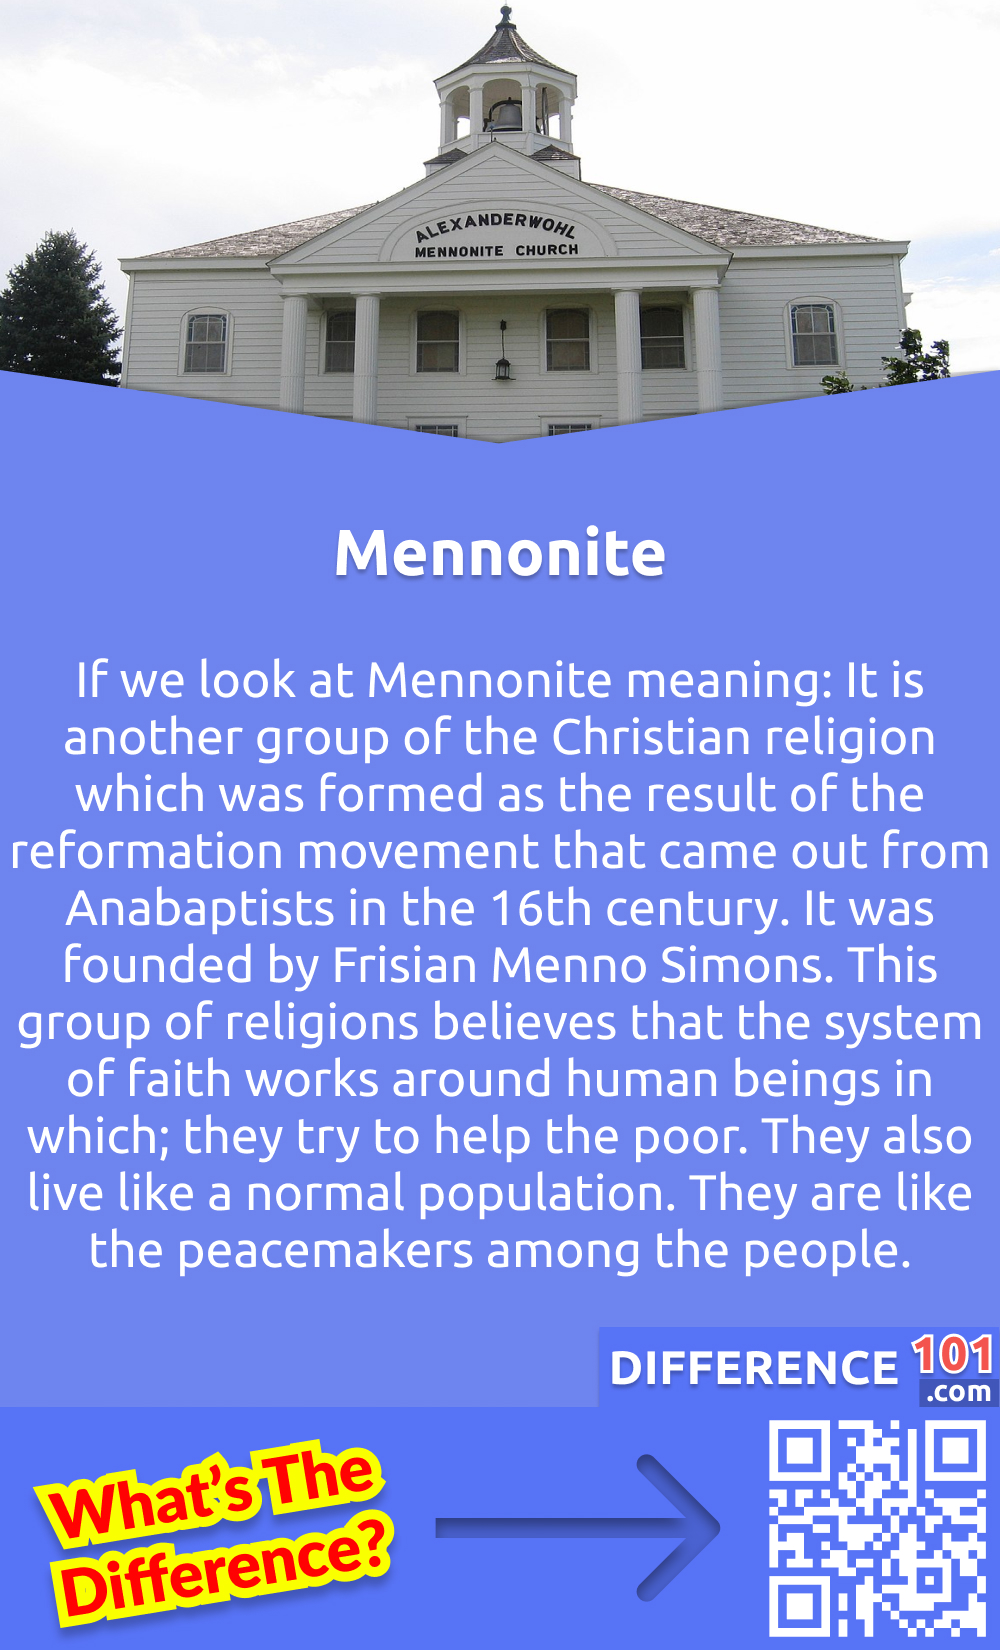 Who are Mennonites? If we look at Mennonite meaning: It is another group of the Christian religion which was formed as the result of the reformation movement that came out from Anabaptists in the 16th century. It was founded by Frisian Menno Simons. This group of religions believes that the system of faith works around human beings in which; they try to help the poor. They also live like a normal population. They are like the peacemakers among the people. The majority use the English language even in the services they hold in their church. They believe that religion and the world should not be mixed and even needs to be treated separately. They follow their religious practices strictly and also emphasize discipline. They live a simple life like other people and use modern technologies. Unlike the Amish, they do not look much different from others. They wear normal clothes like women wear printed, floral or plain prints according to their choice, and men do not have to possess a full beard.